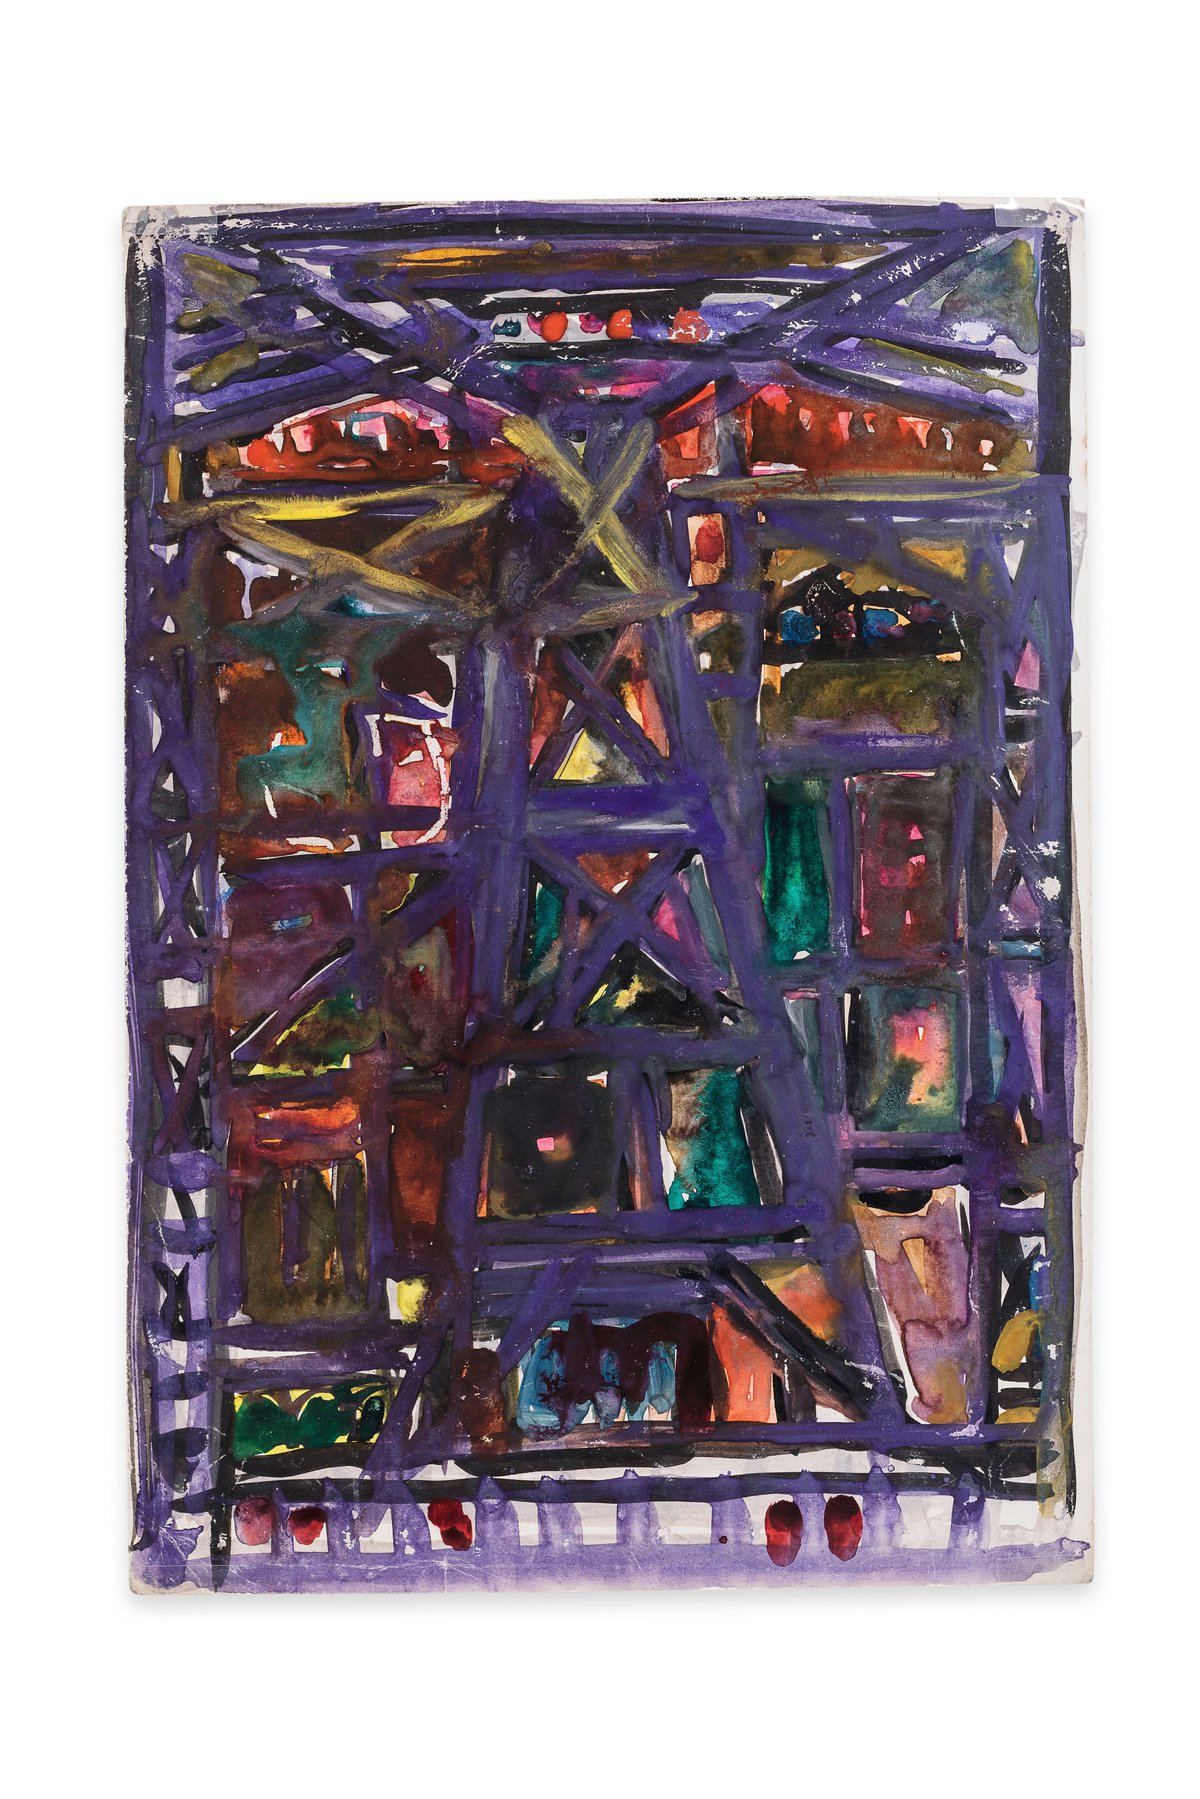 Anna AndreevaElectrification, 1962Gouache on technical paper30.1 x 20.8 cm